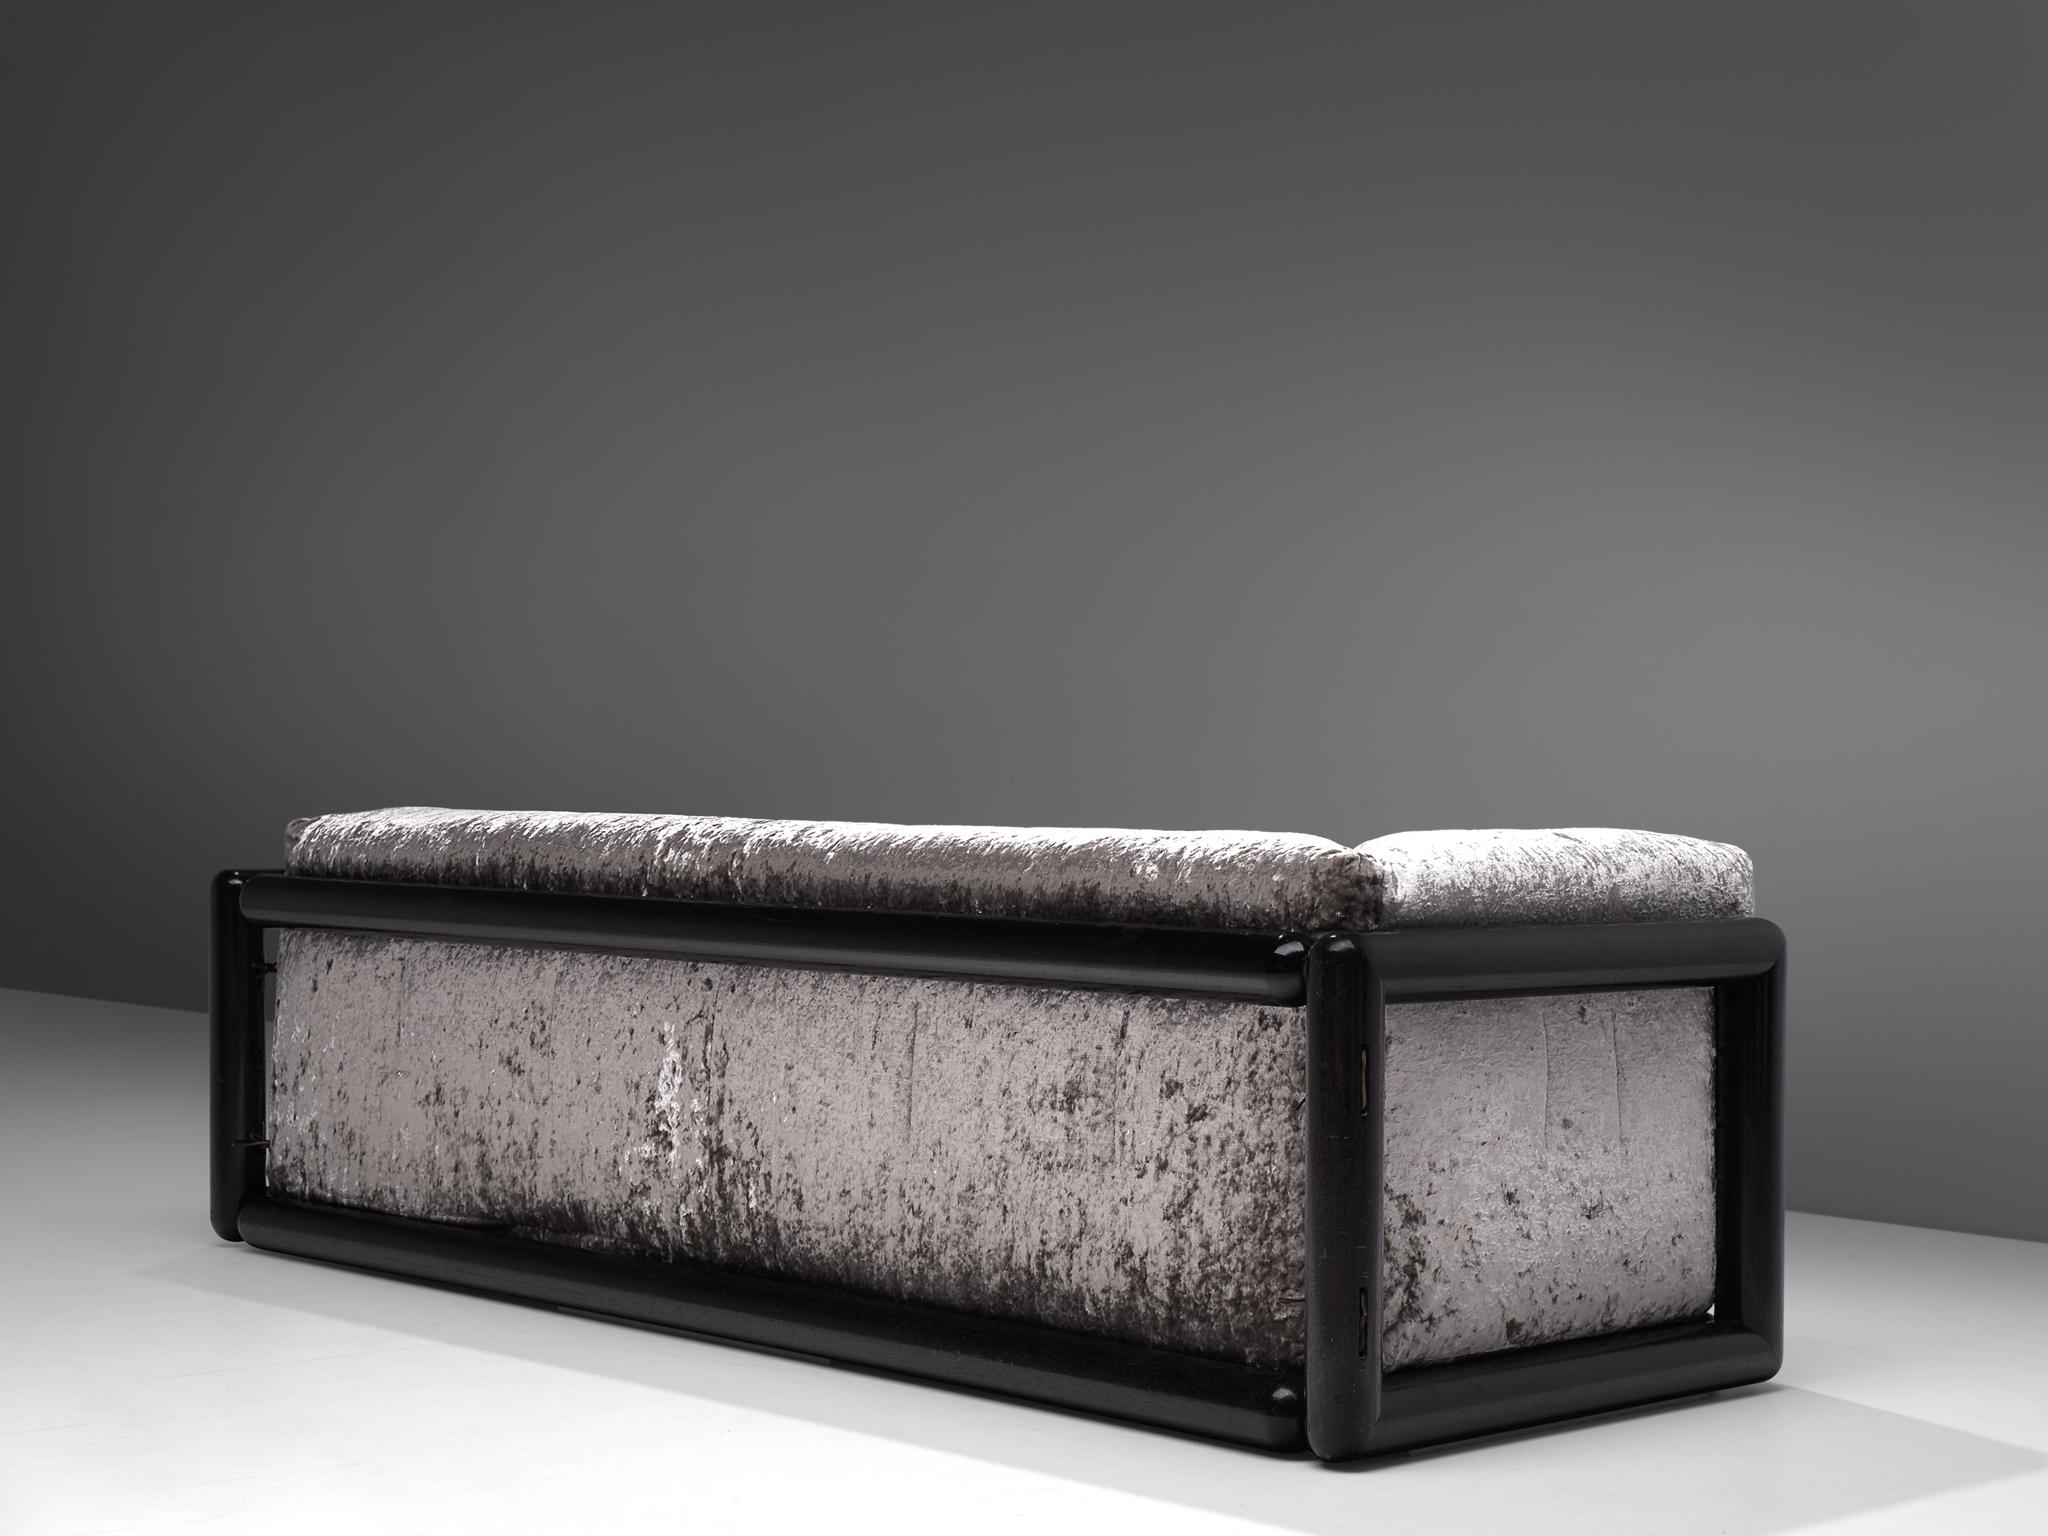 Carlo Scarpa for Simon, 'Cornaro' sofa, silver metallic velvet fabric, wood, Italy, 1973

The 'Cornaro' sofa by Carlo Scarpa is a perfect example of the ultrarazionale style; breaking away from the strict limits of rationalism, resulting in a sofa